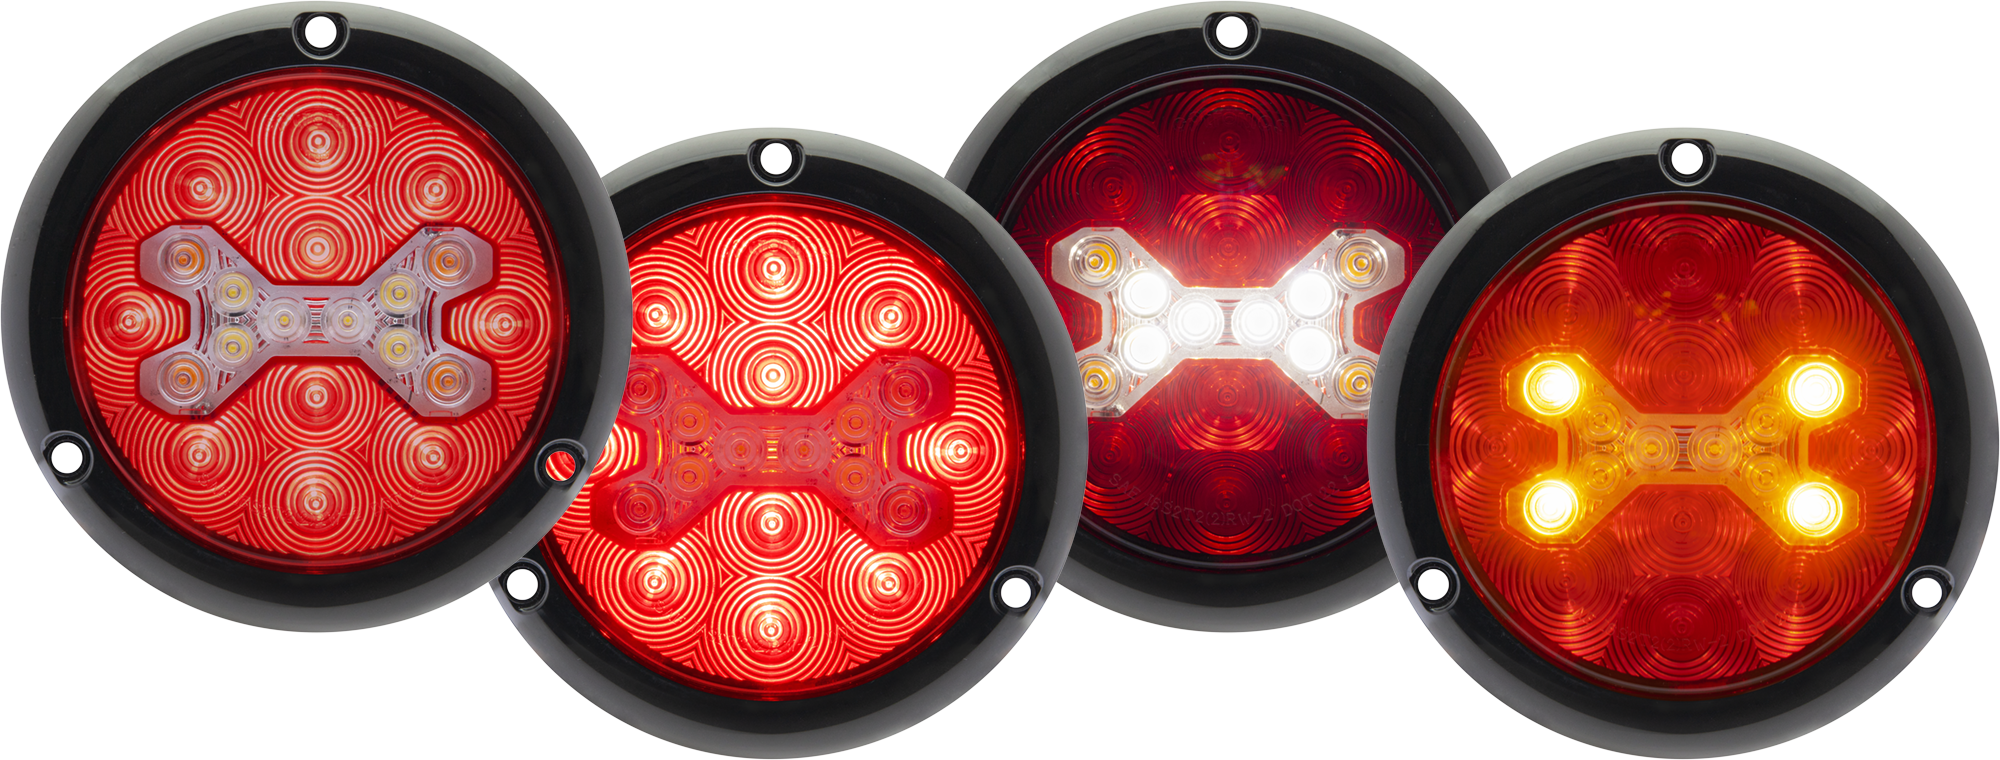 With four preprogrammed flash patterns to choose from, the FusionX STLW lamps, with their warning light, have what it takes to meet the task at hand.